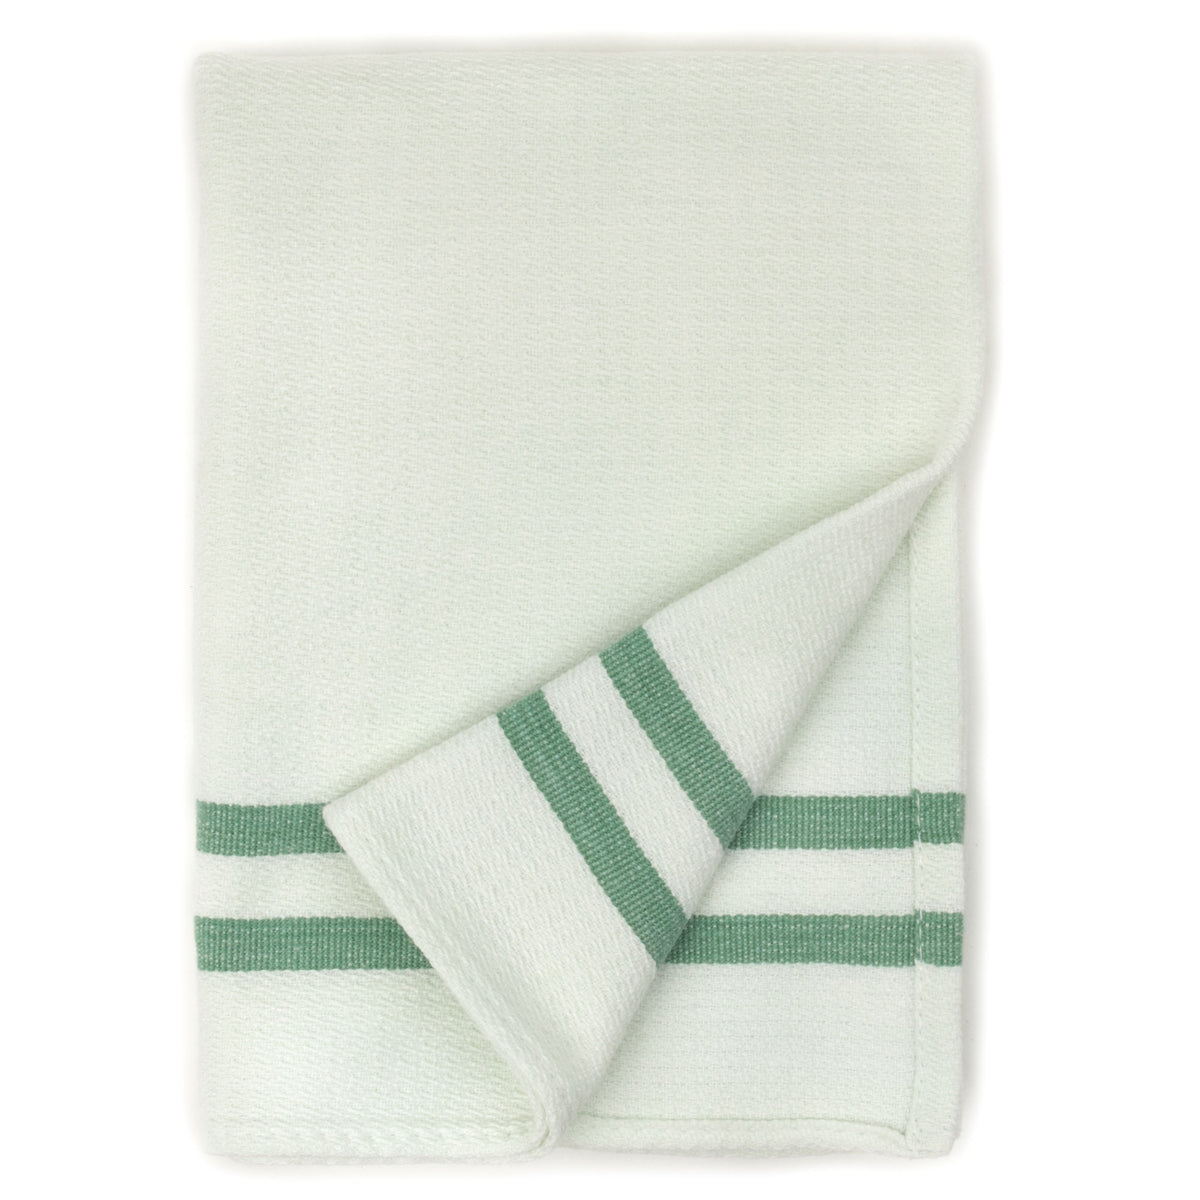 Czech Army Kitchen Towel | 3-pack